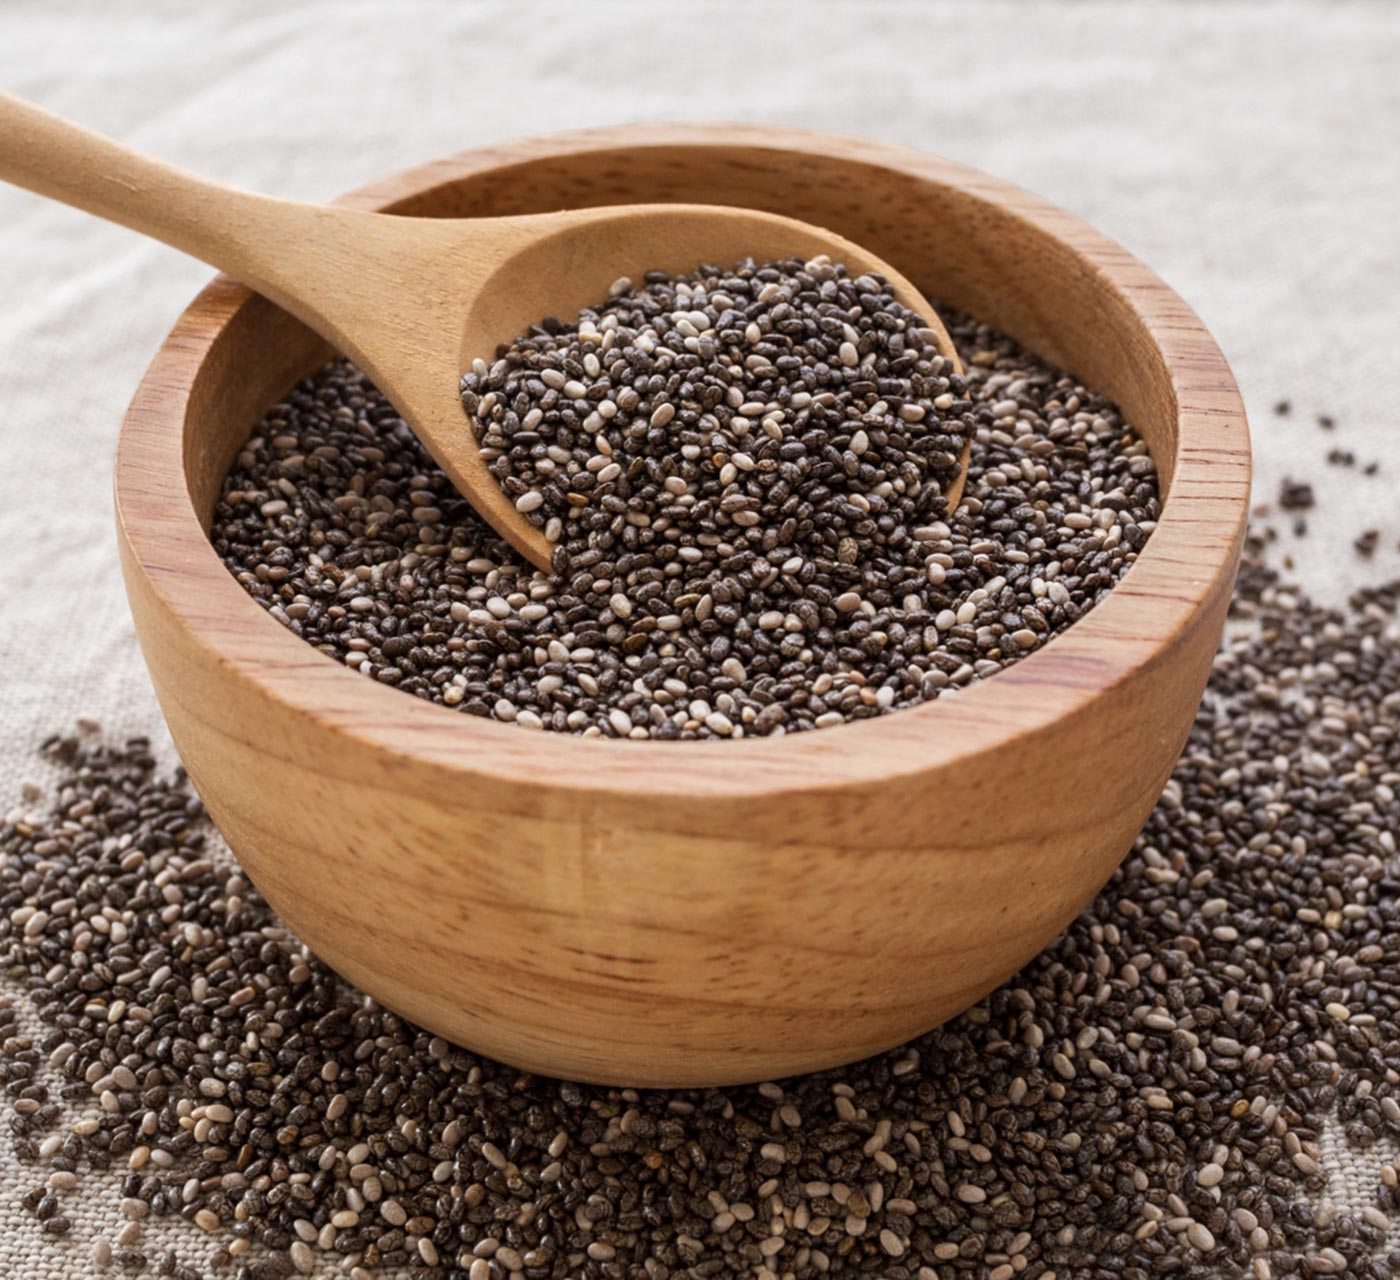 Are Chia Seeds Really Effective For Weight Loss?